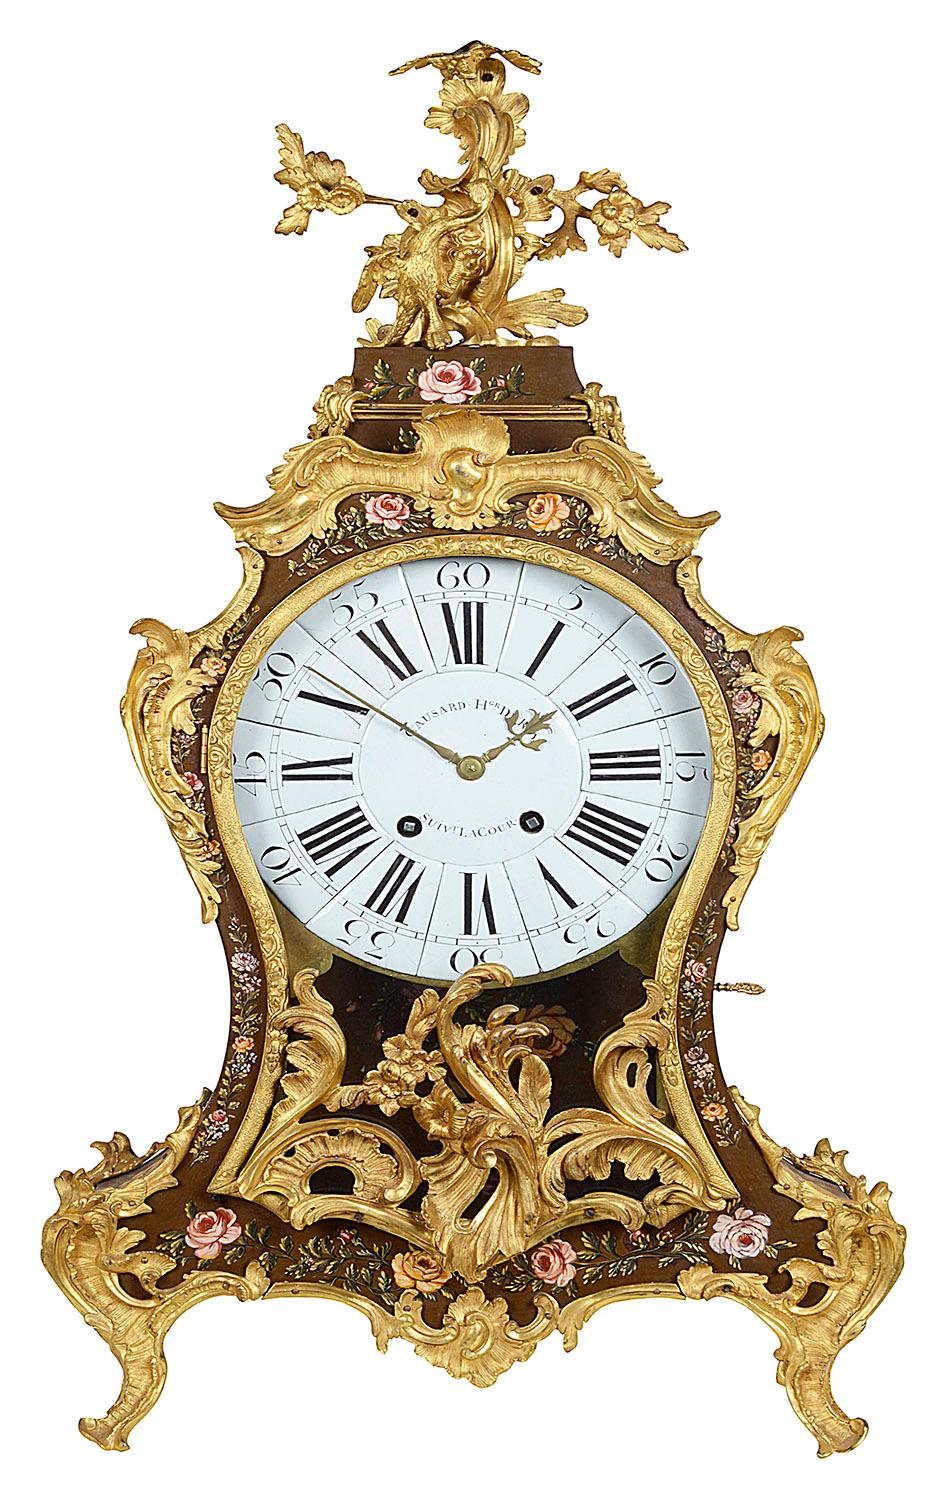 An impressive French 18th century, Louis XV period bracket clock, having wonderful Rococo style gilded ormolu scrolling mounts. the caddy top with a Ho Ho bird among foliage, the waisted case with glazed panels to the sides and hand painted flowers.